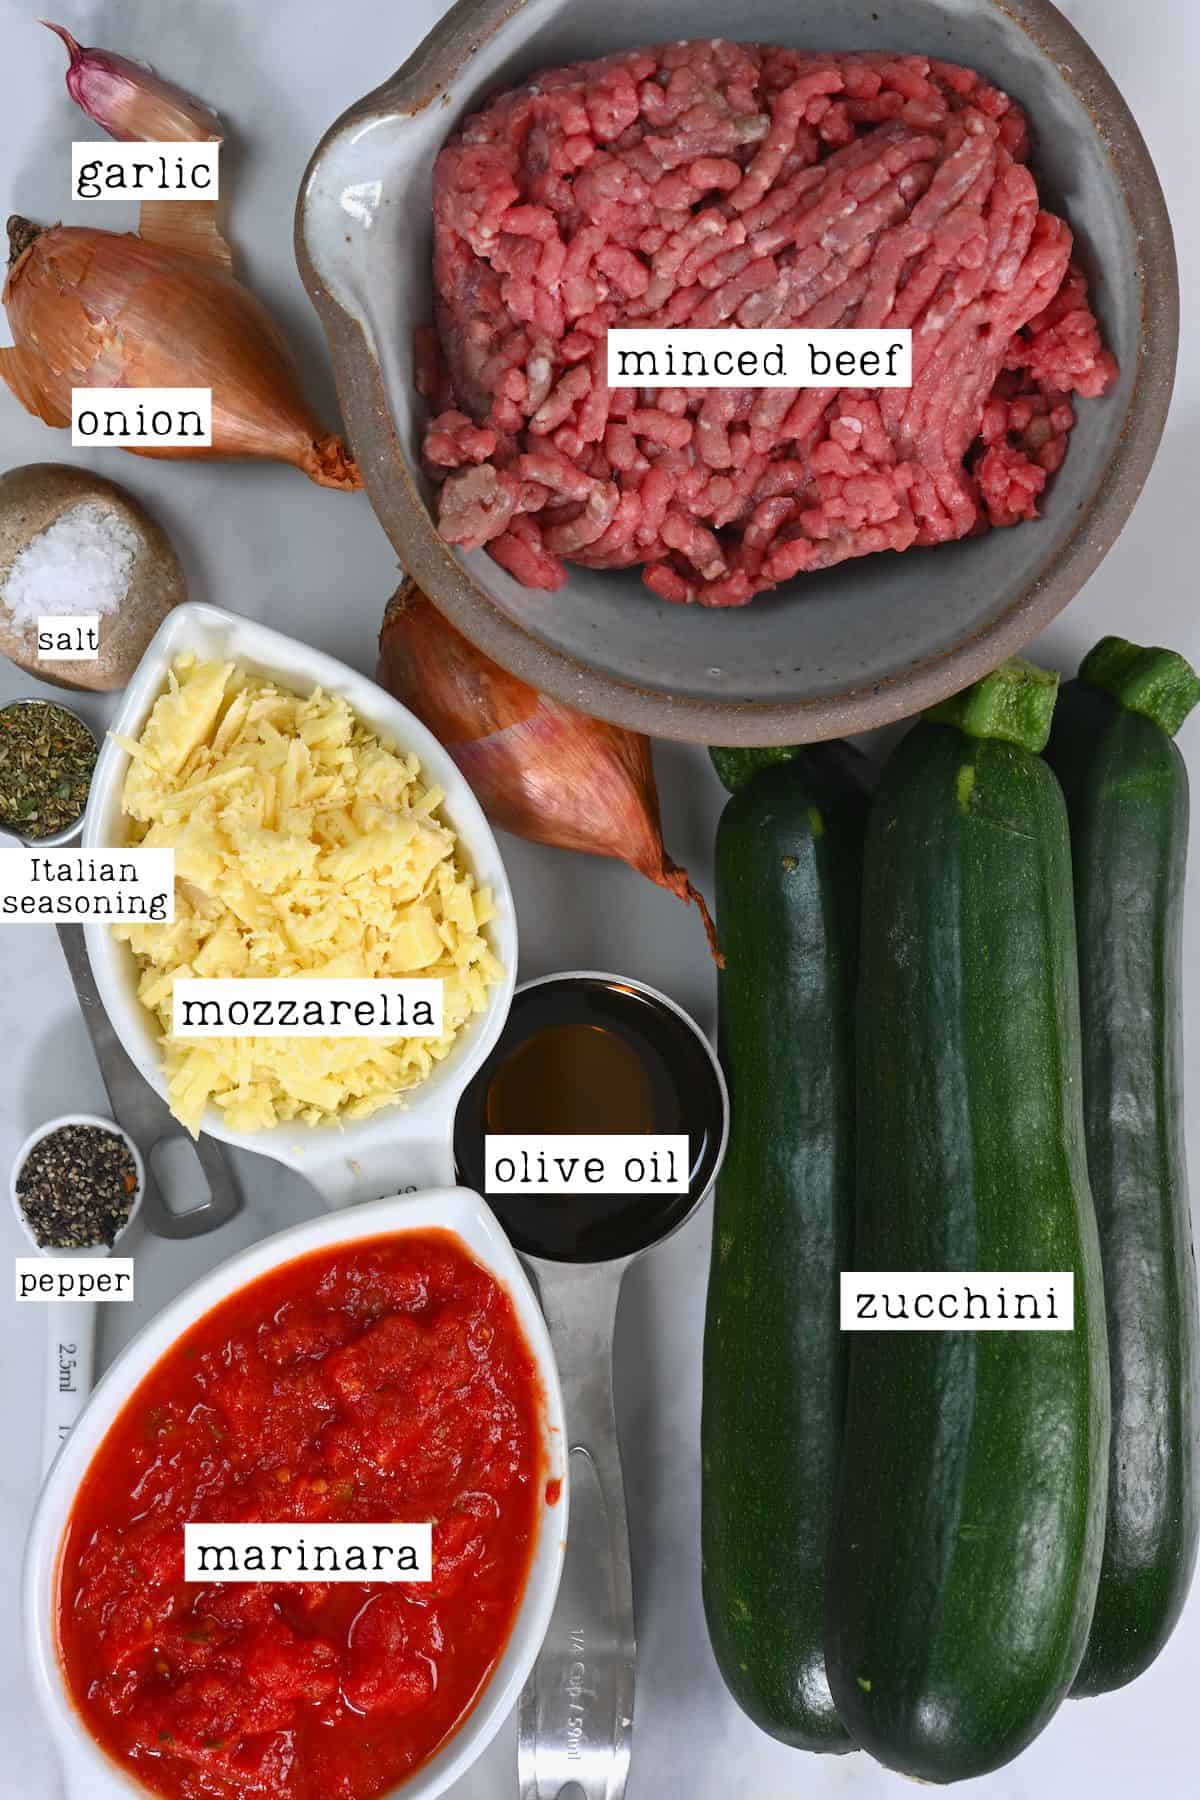 Ingredients for stuffed zucchini